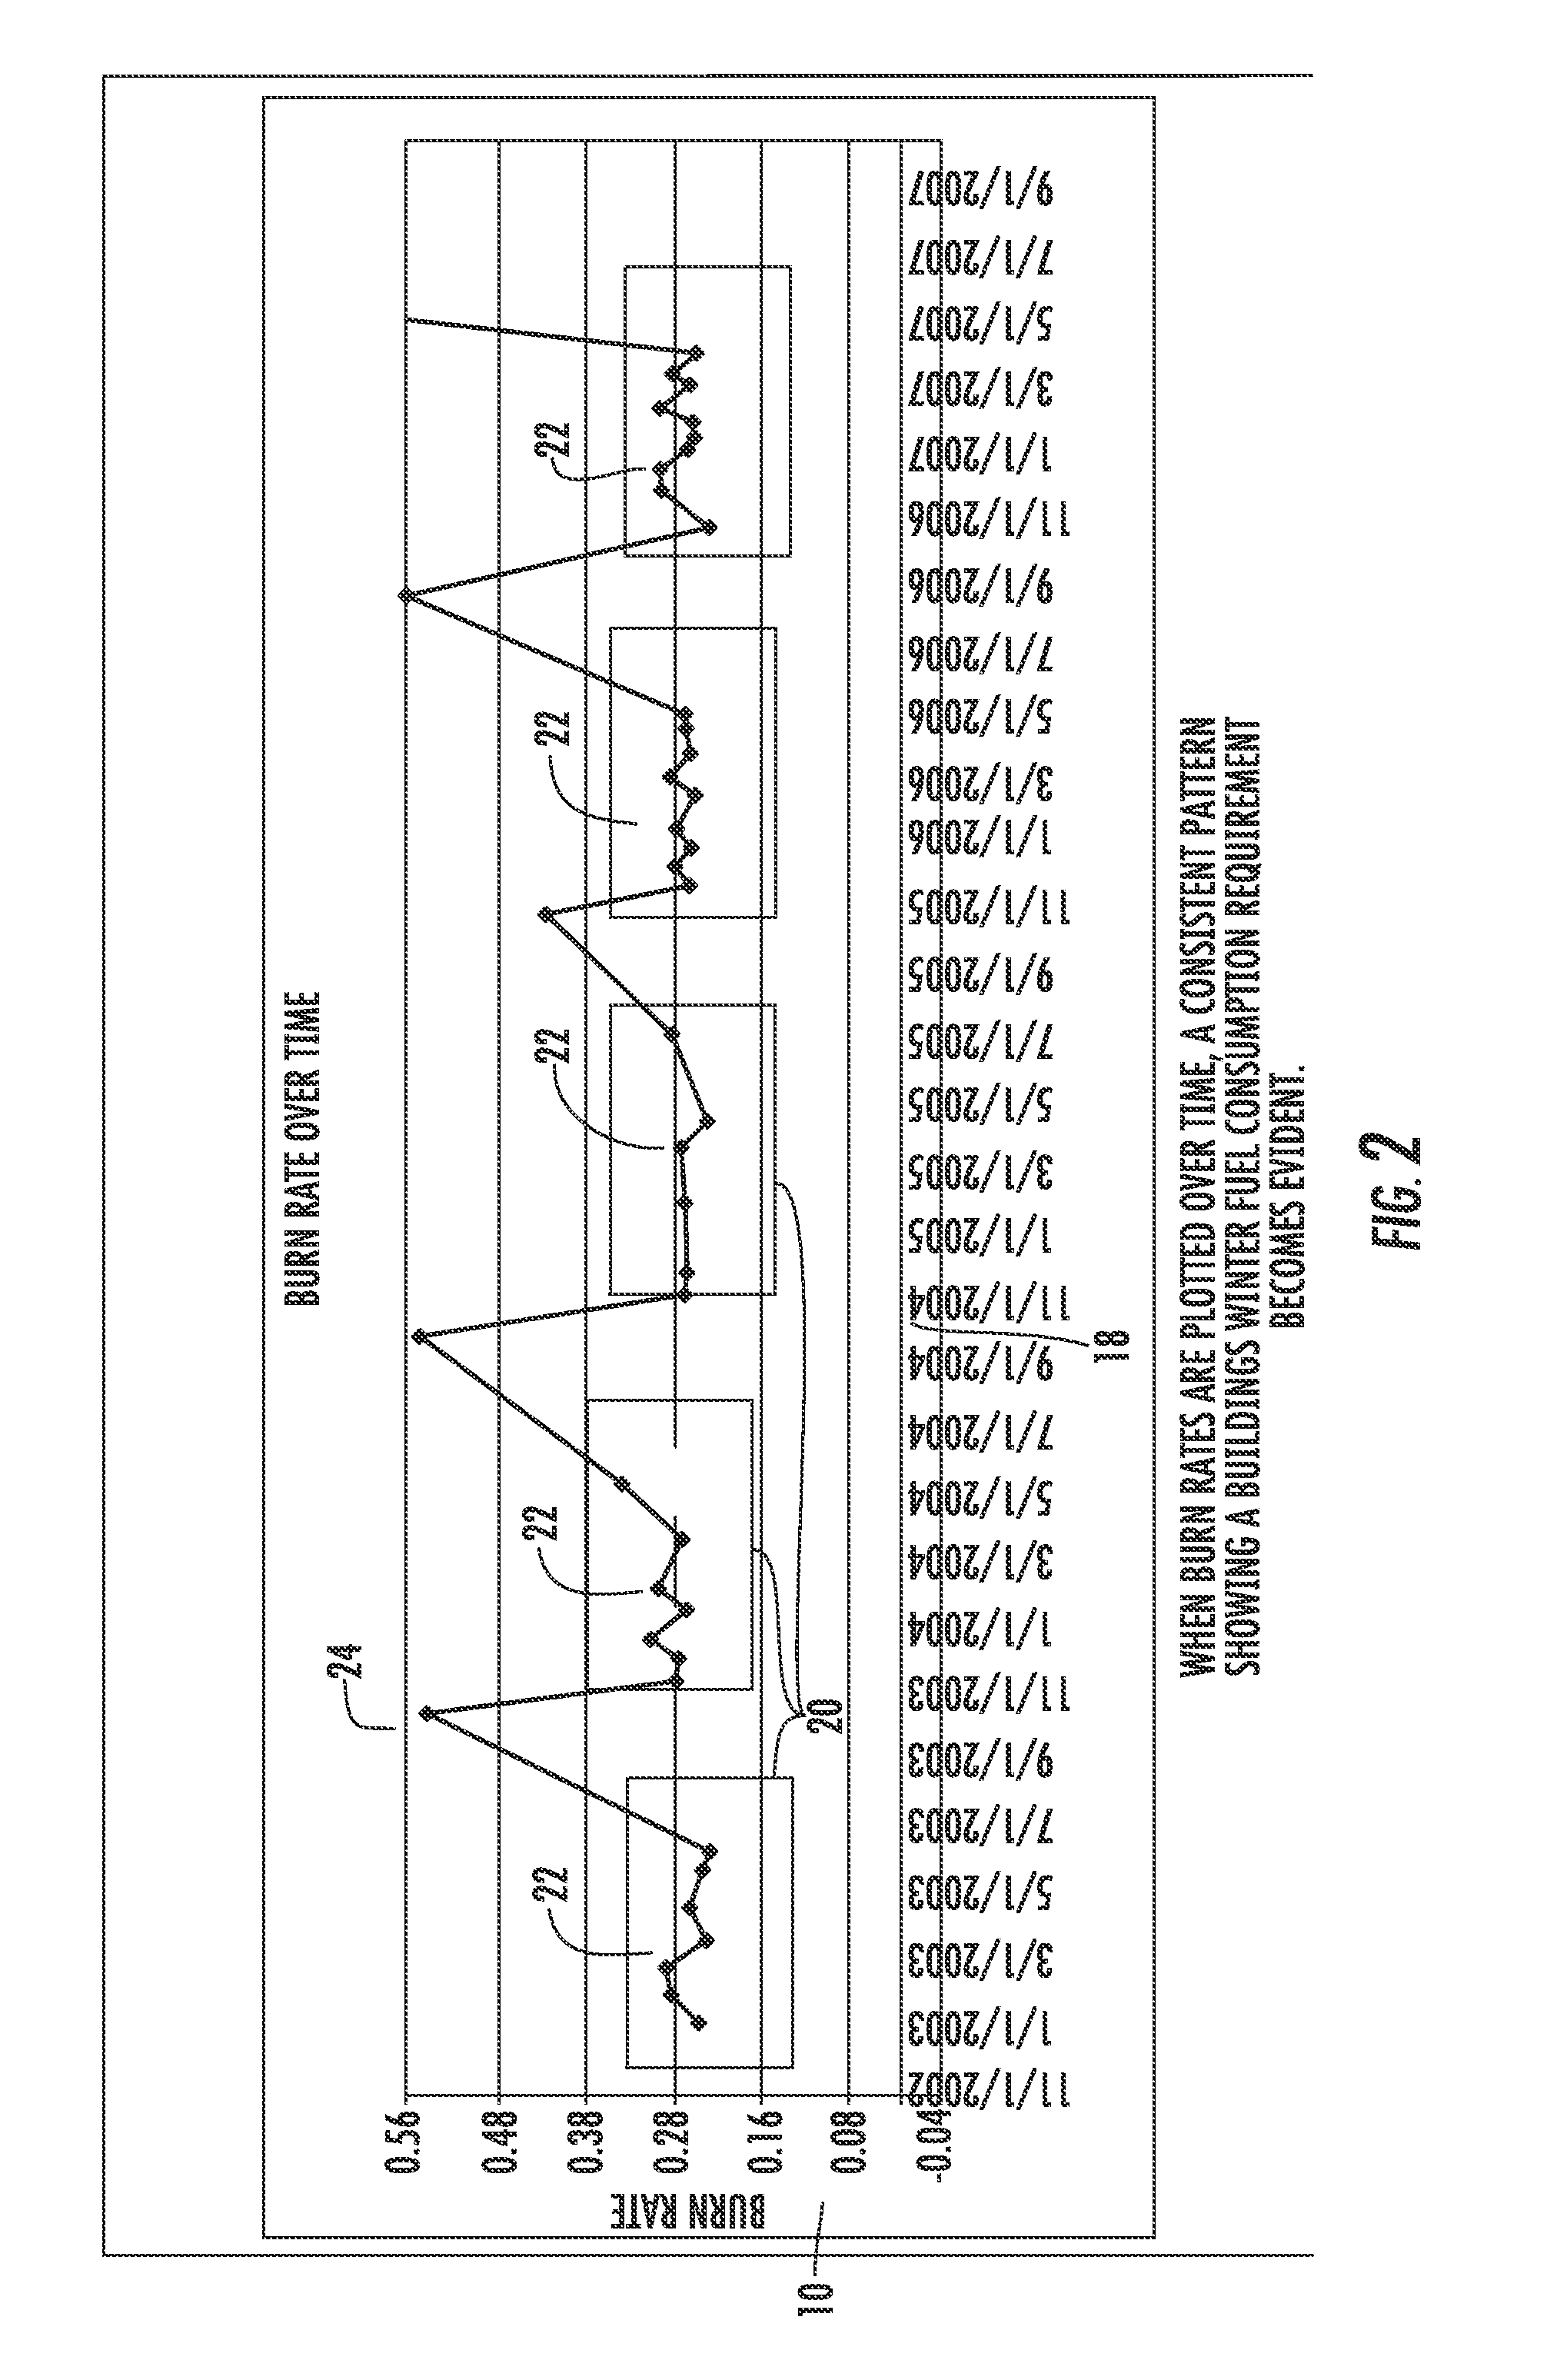 Method and system for determining residential fuel usage